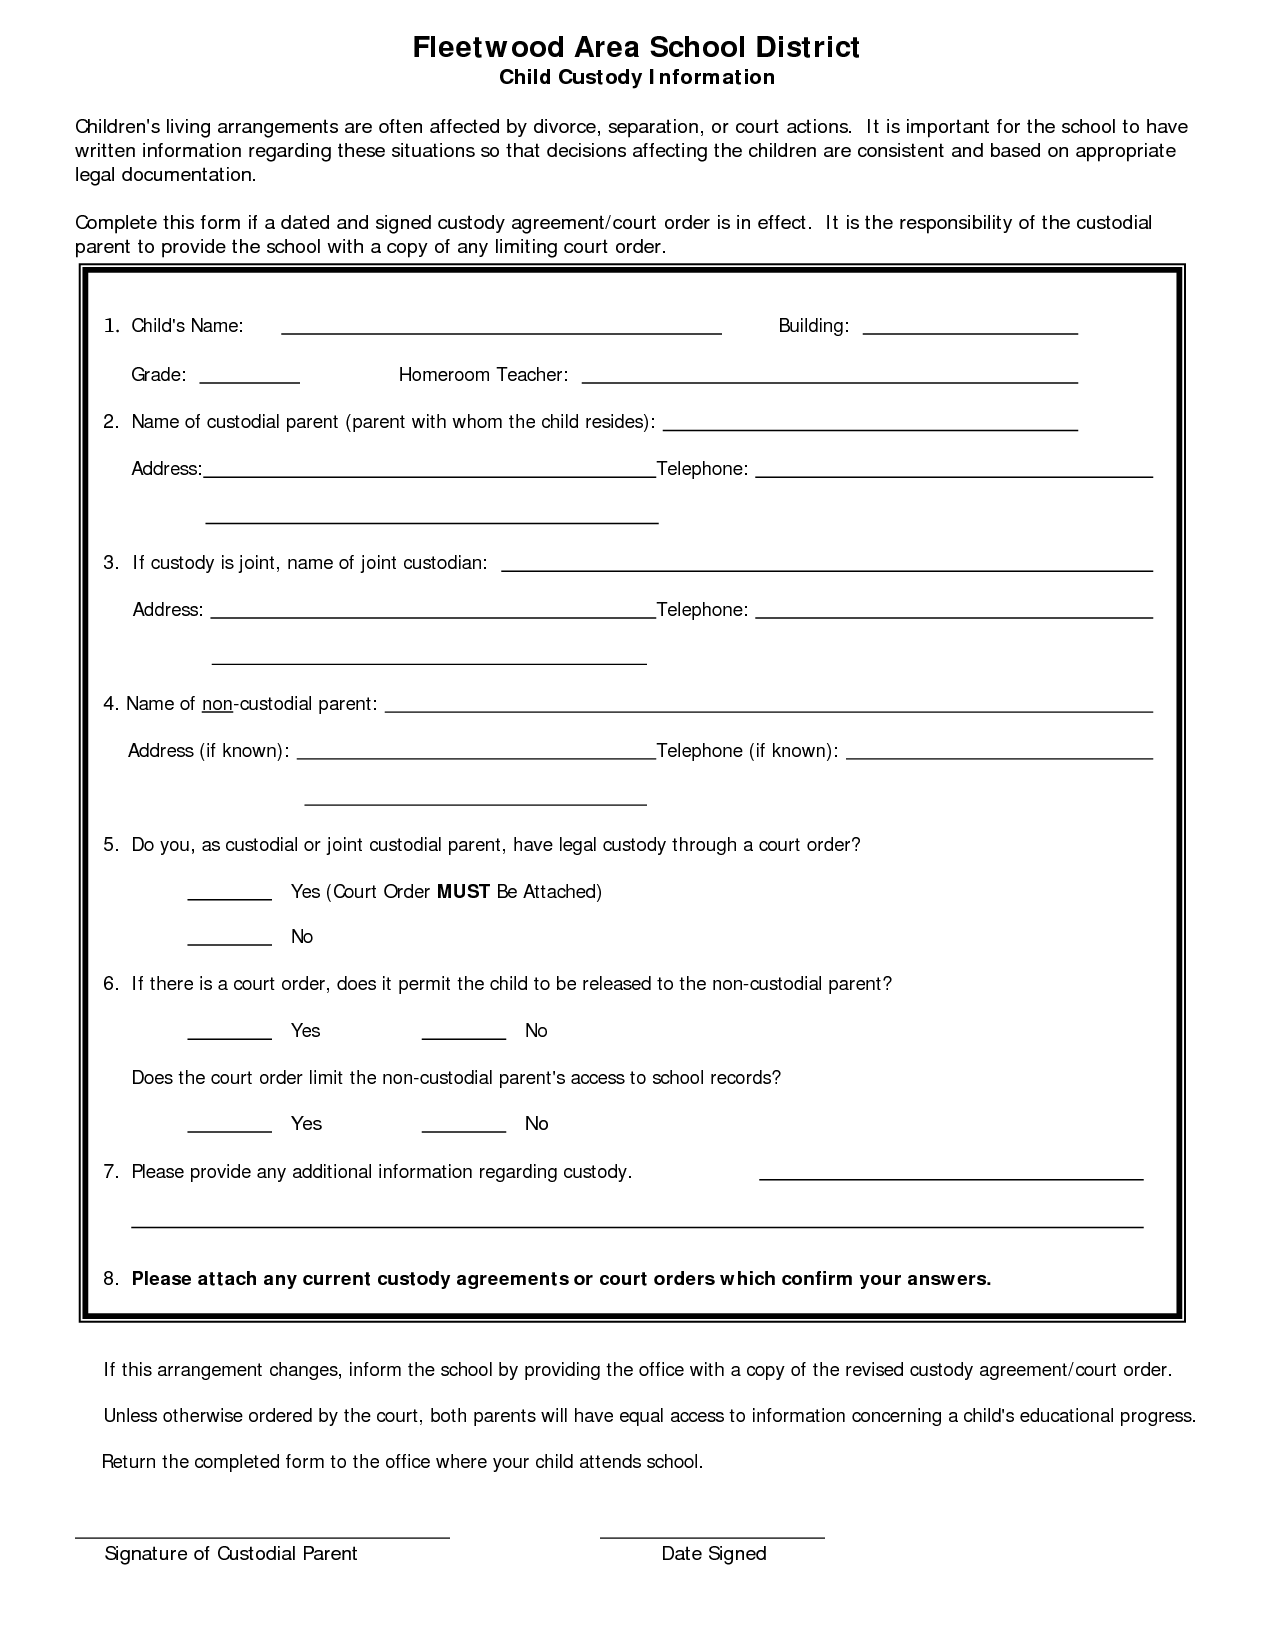 Sample Custody Agreement Forms Images and Photos finder